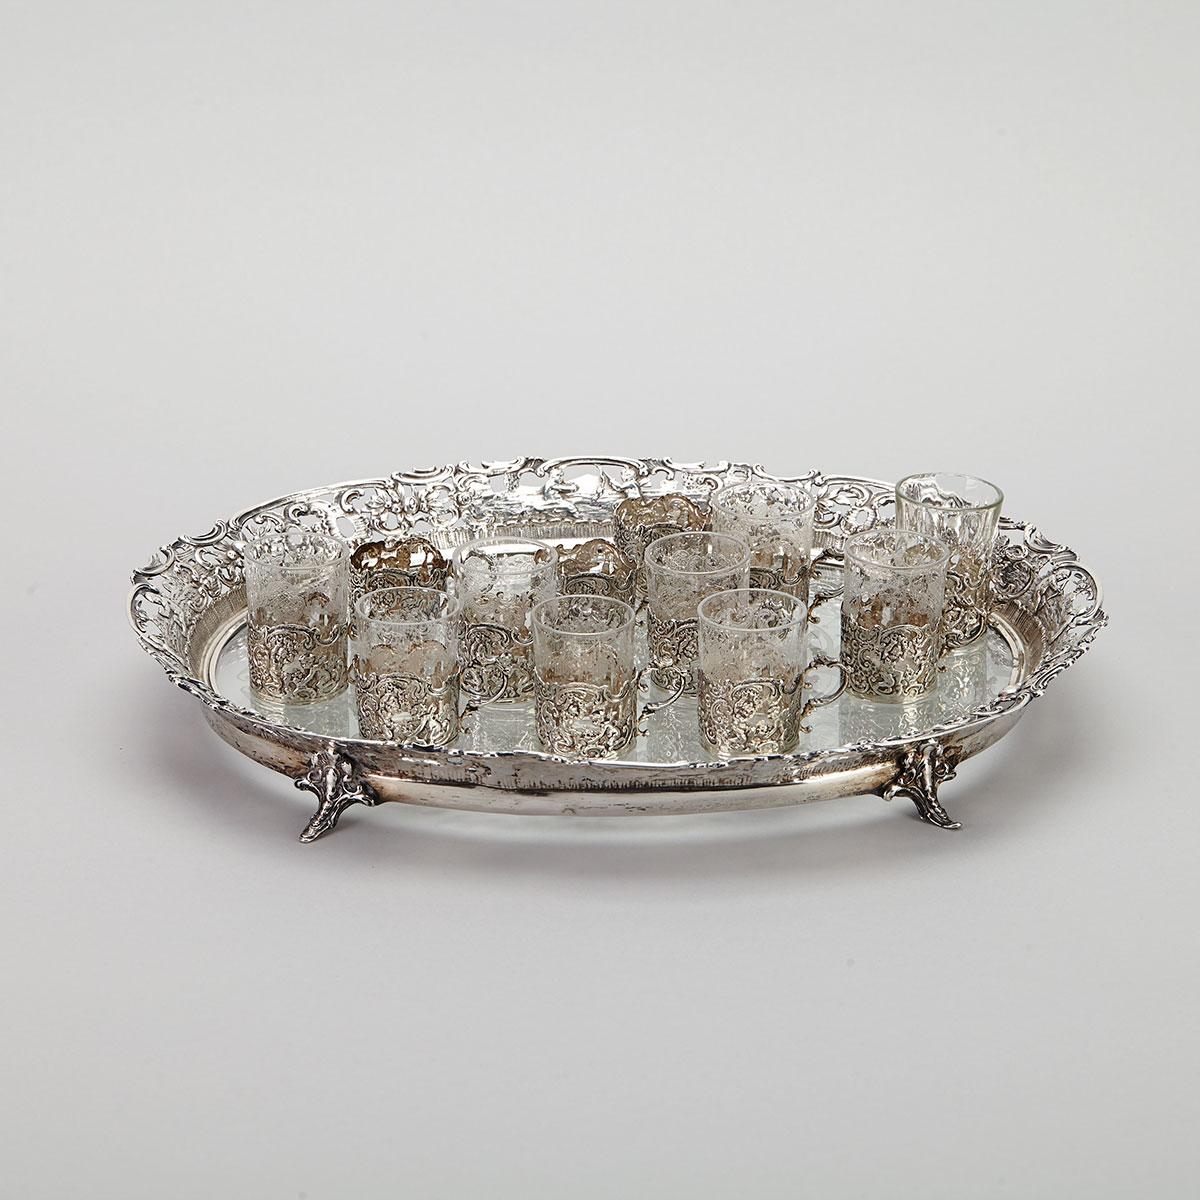 German Silver and Etched Glass Oval Tray with Twelve Cups, J.D. Schleissner & Söhne, Hanau, c.1900